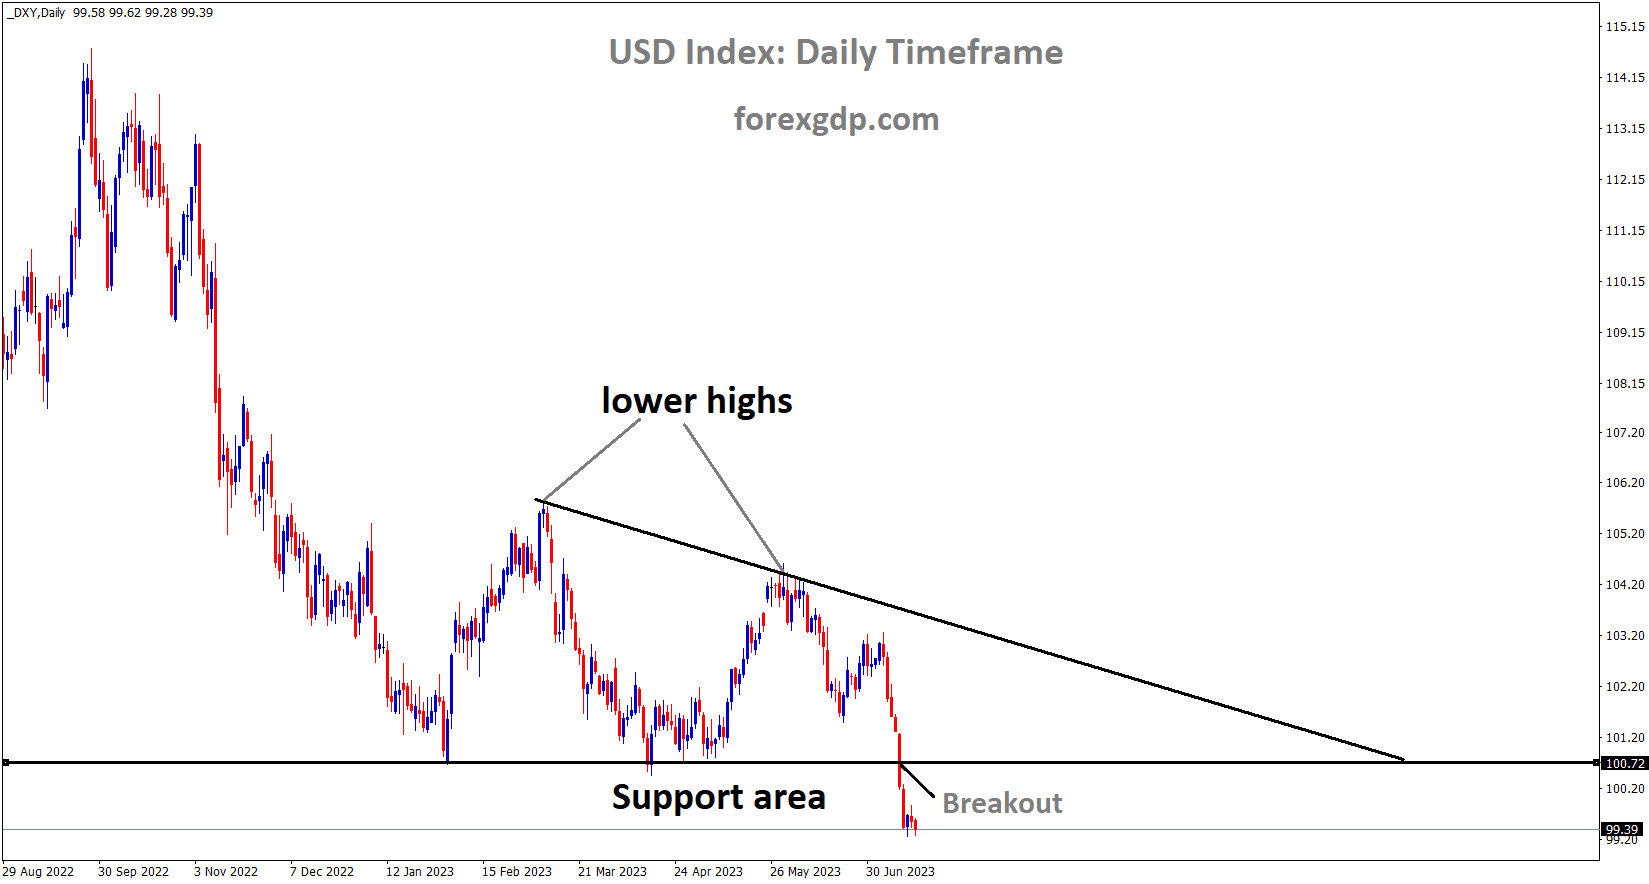 DXY US Dollar index has broken the Descending triangle pattern in downside